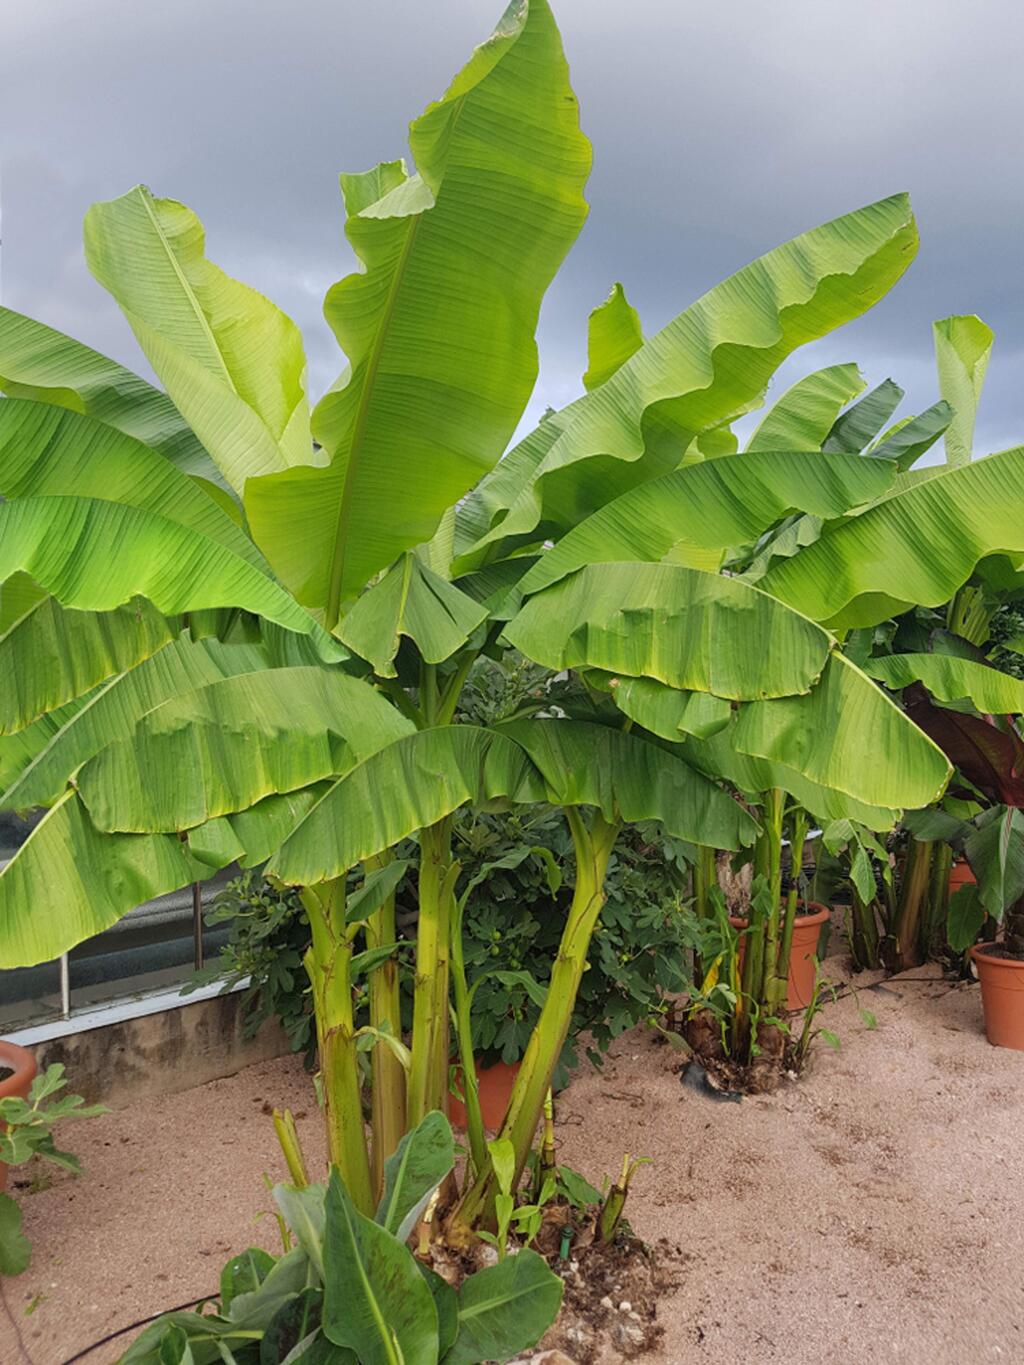 Ornamental banana plants are grown in gardens for their big, beautiful leaves.